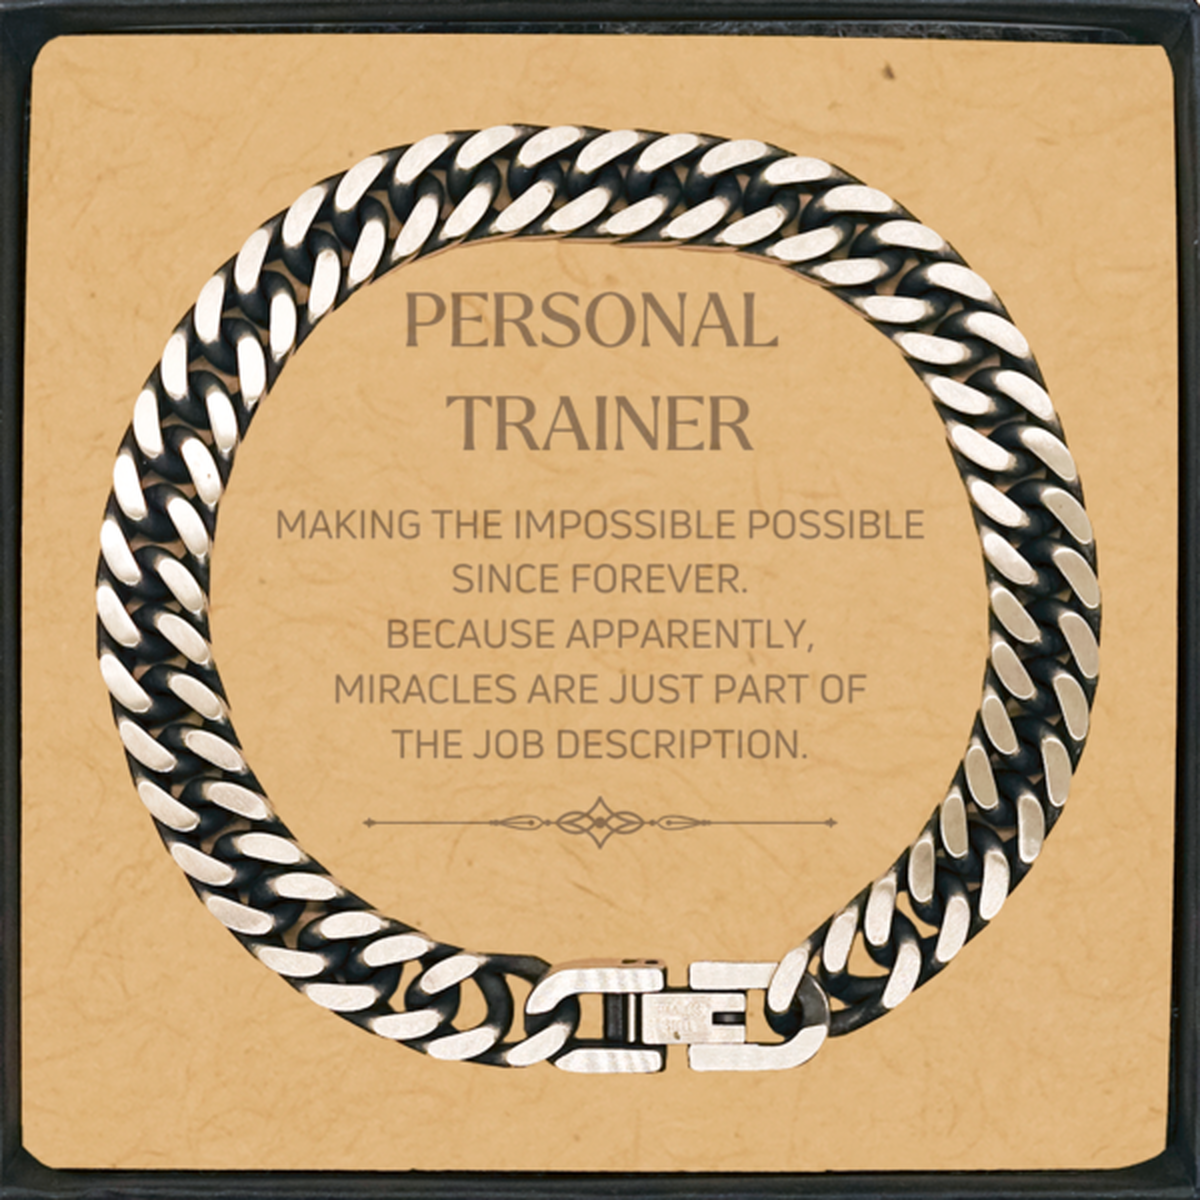 Funny Personal Trainer Gifts, Miracles are just part of the job description, Inspirational Birthday Cuban Link Chain Bracelet For Personal Trainer, Men, Women, Coworkers, Friends, Boss